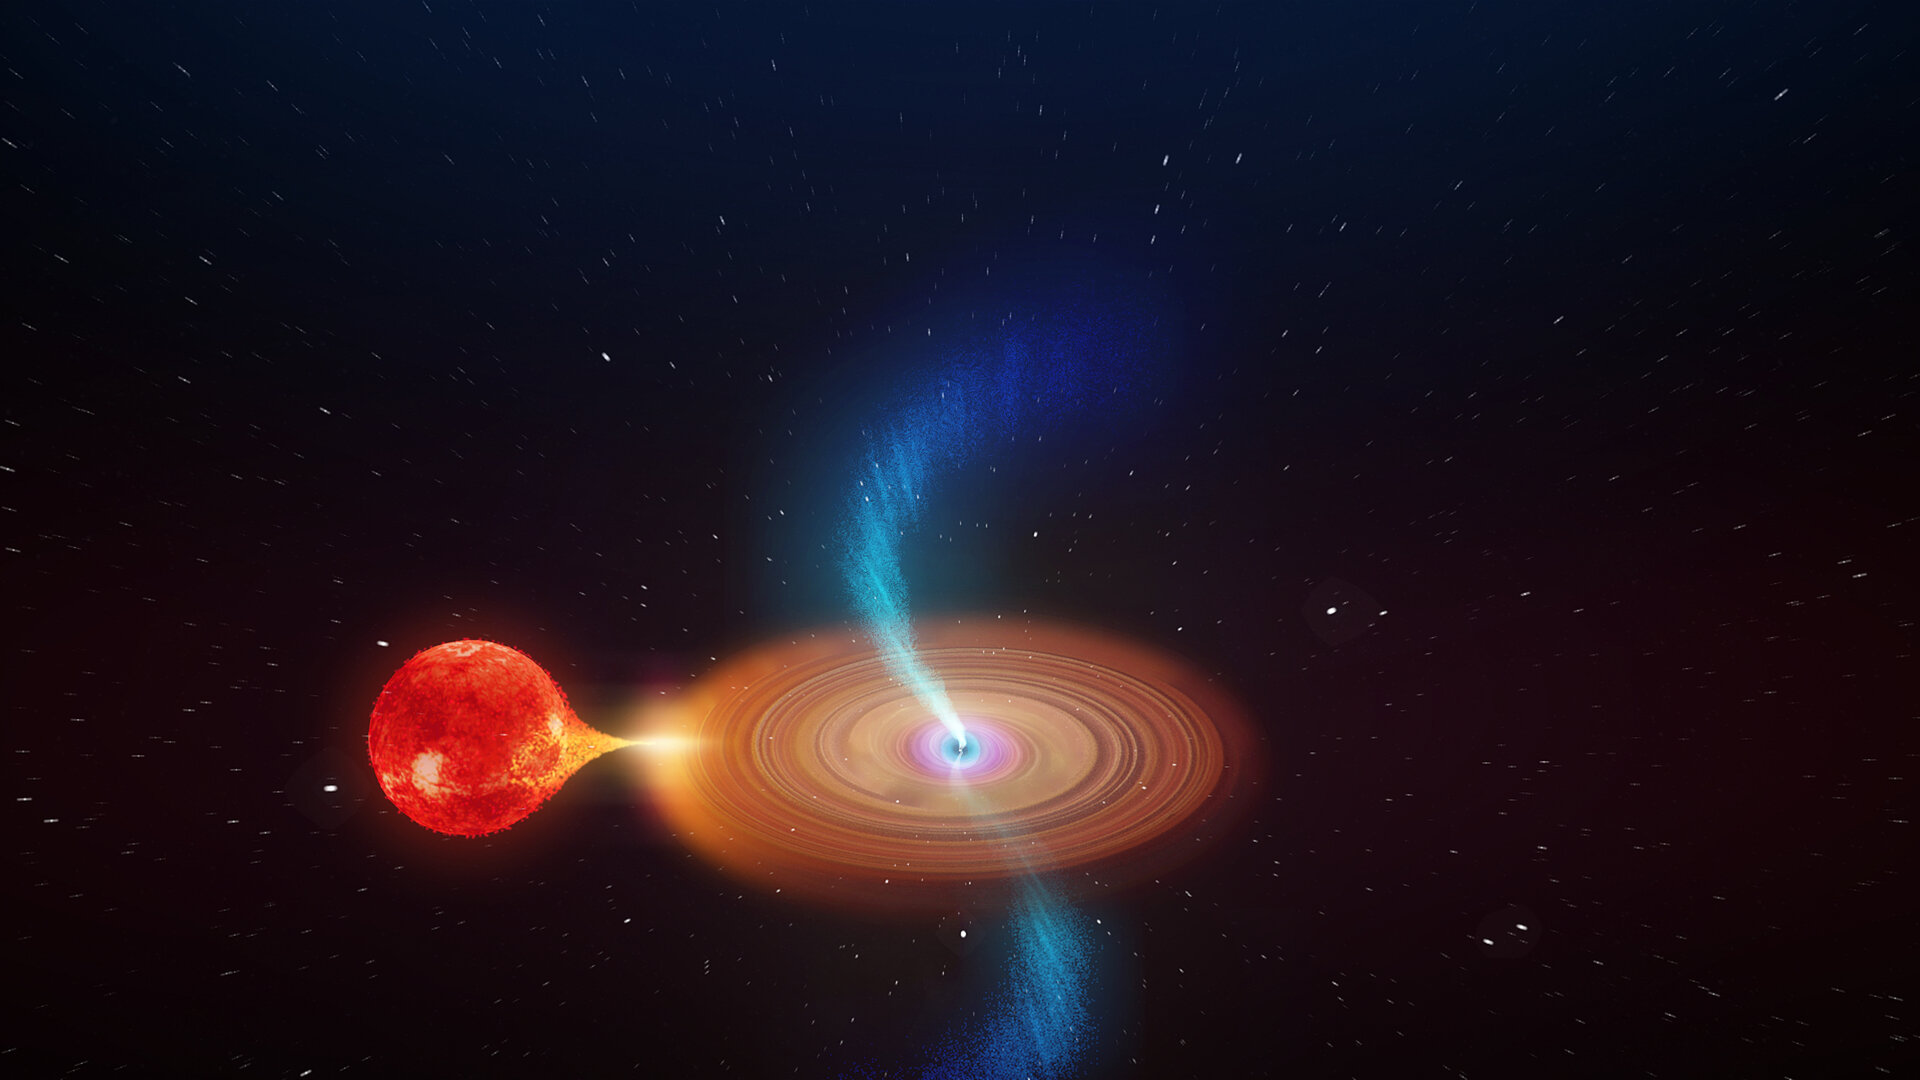 A star seems to be getting pulled into the accretion disk of a black hole, which looks like a reddish orb getting funneled into an orange disk. At the center, a blue-ish gap exists, from which two blue outbursts plunge vertically.